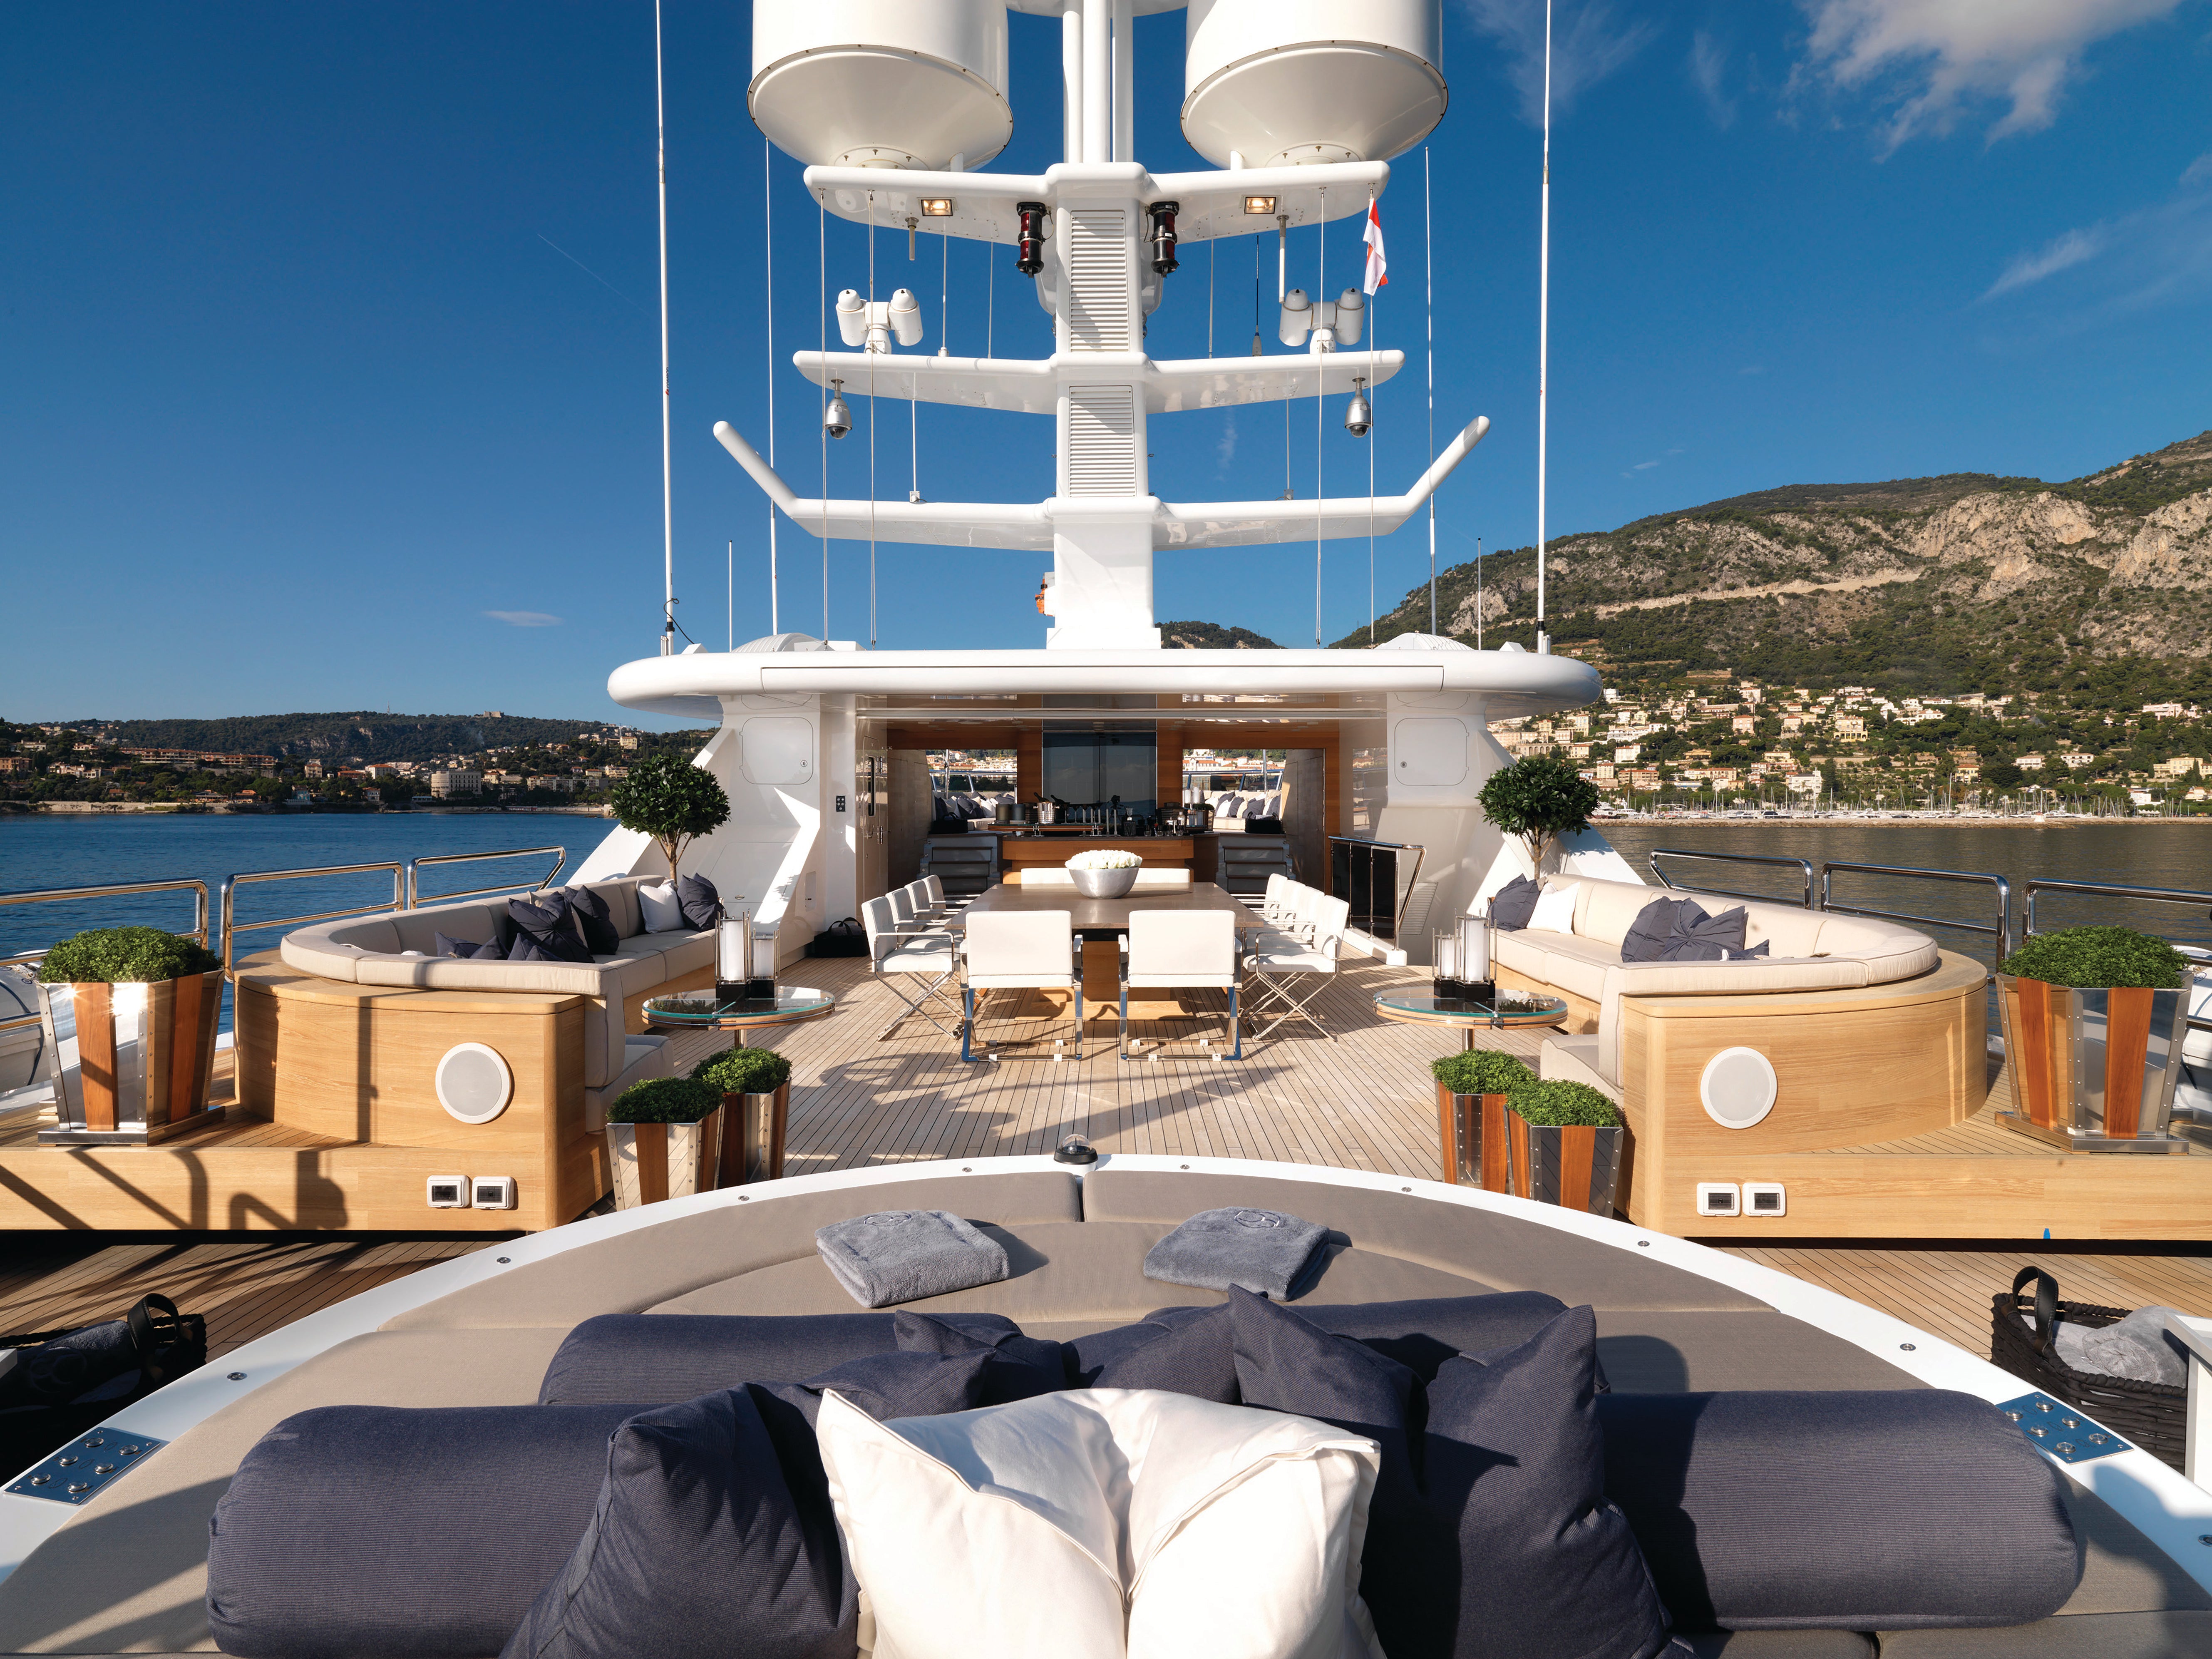 Yachts to charter